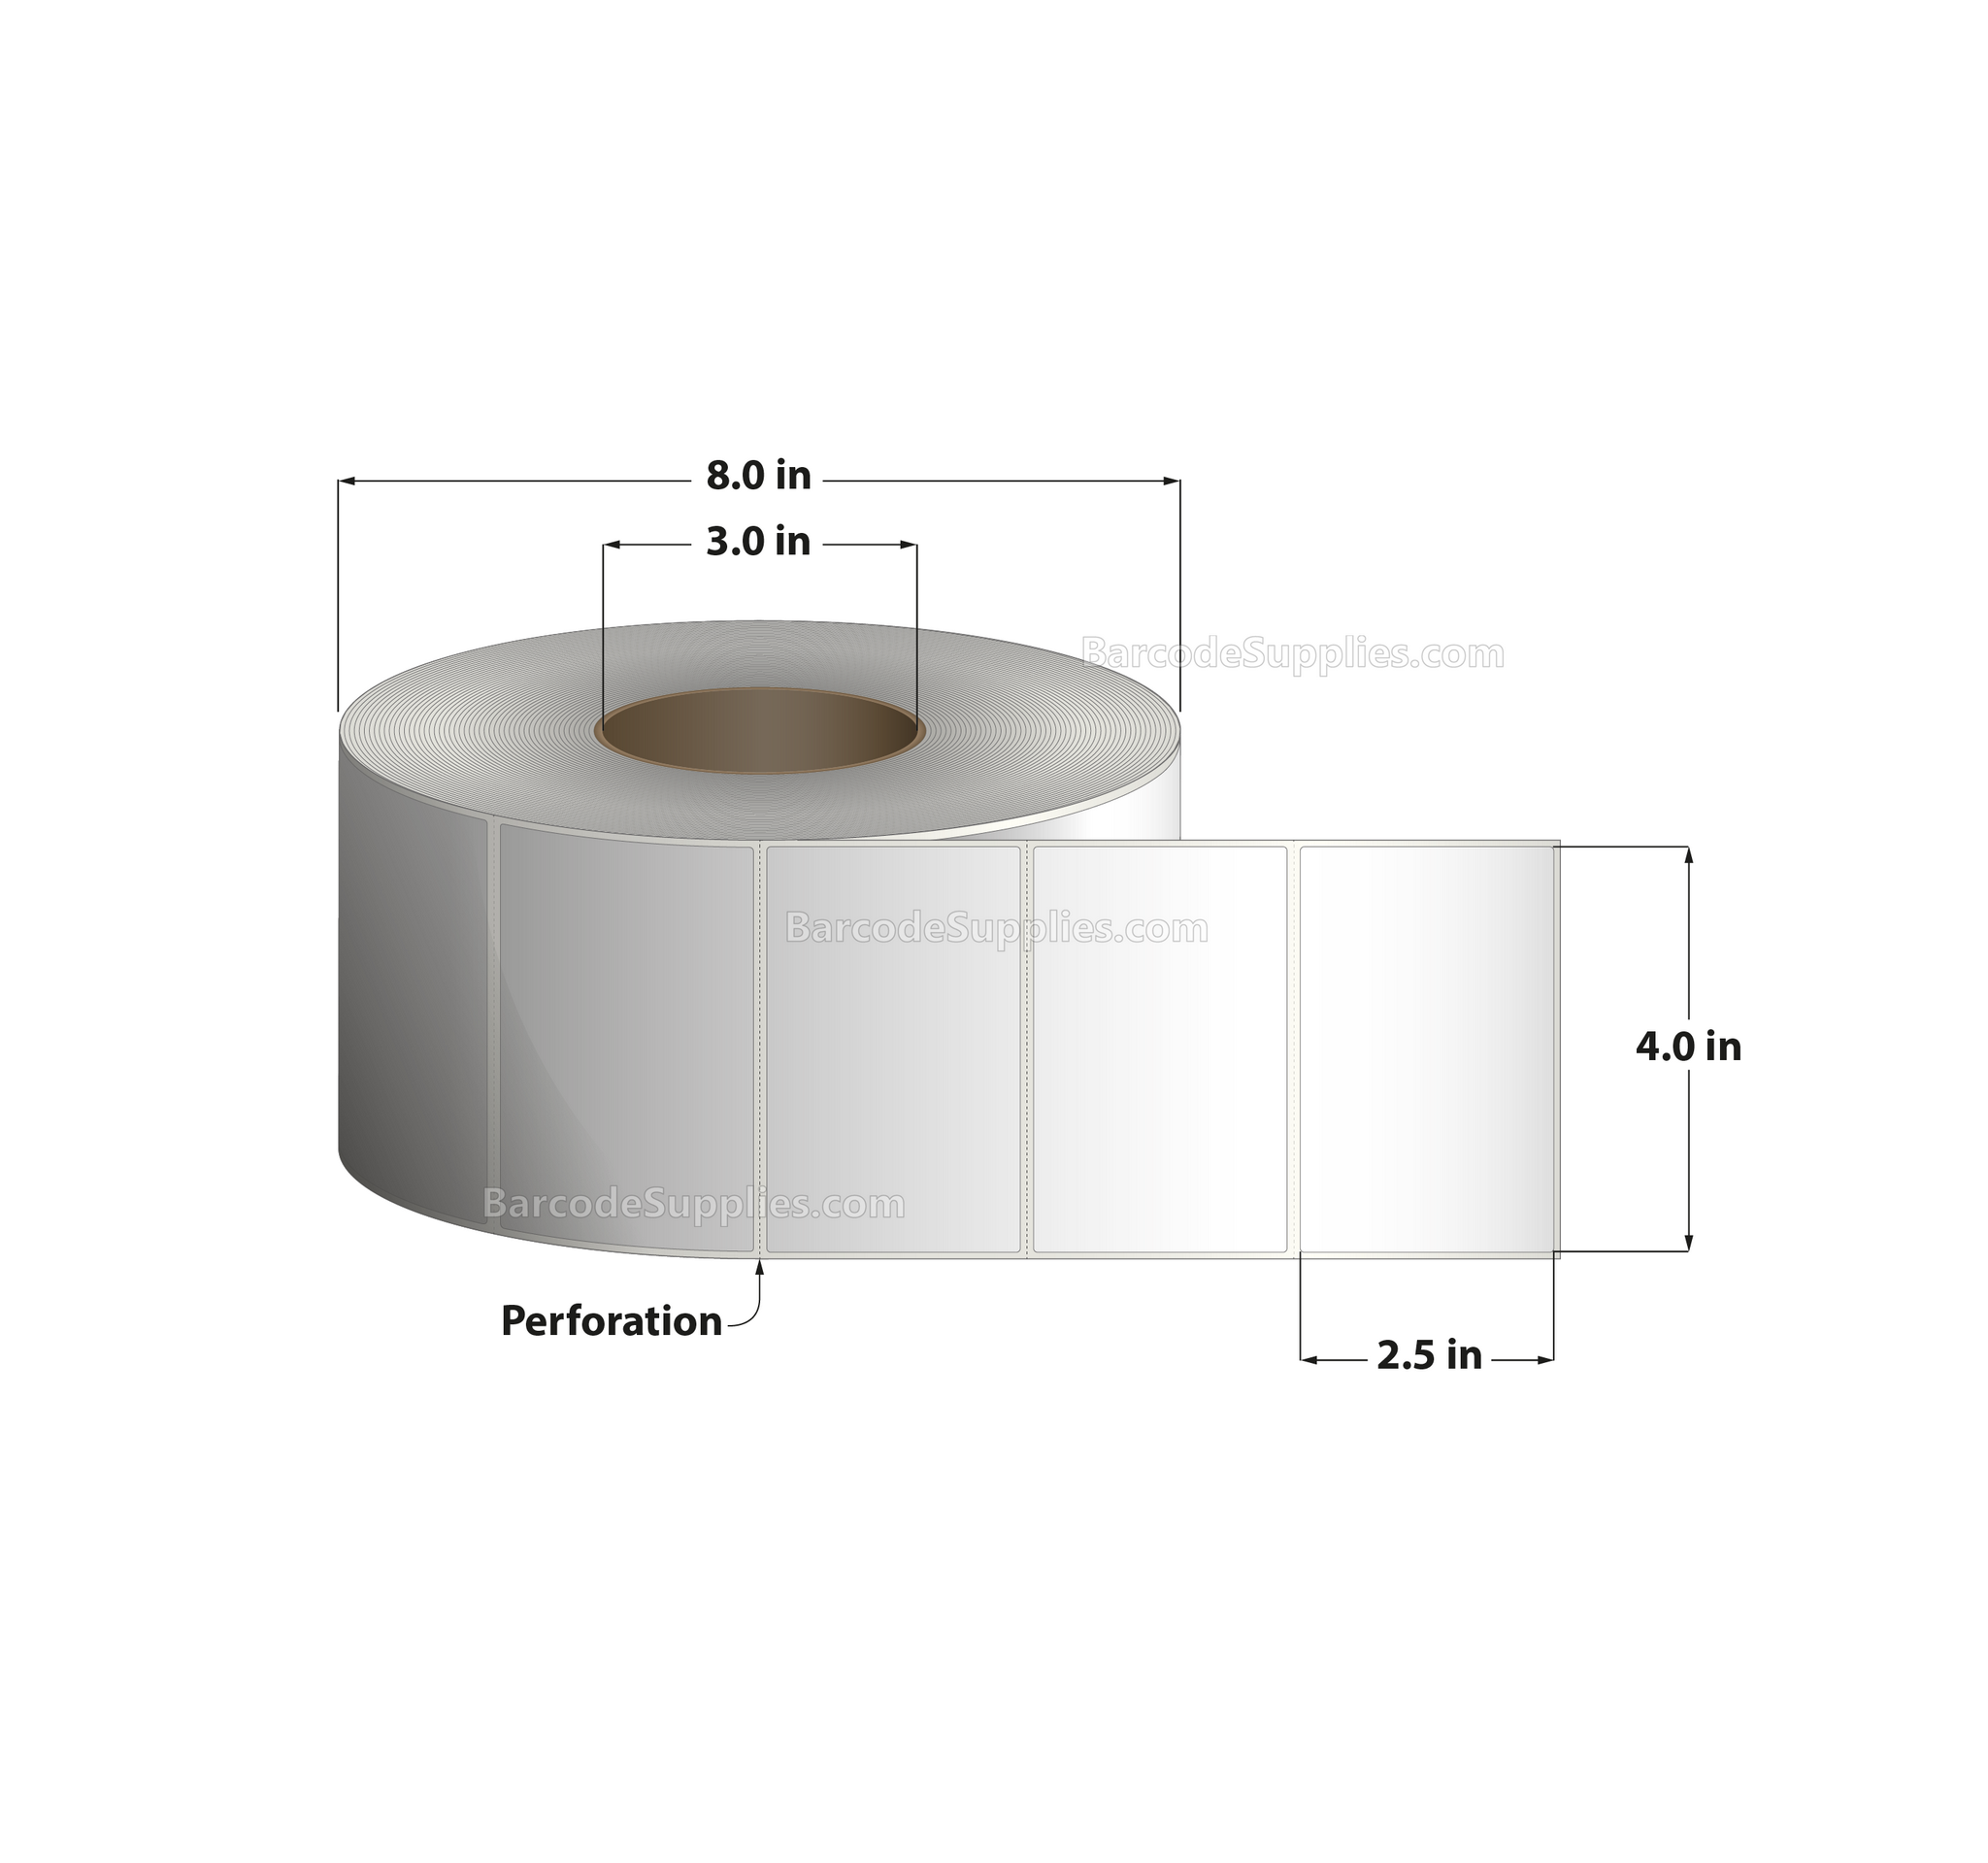 4 x 2.5 Thermal Transfer White Labels With Permanent Acrylic Adhesive - Perforated - 2500 Labels Per Roll - Carton Of 4 Rolls - 10000 Labels Total - MPN: TH425-1P